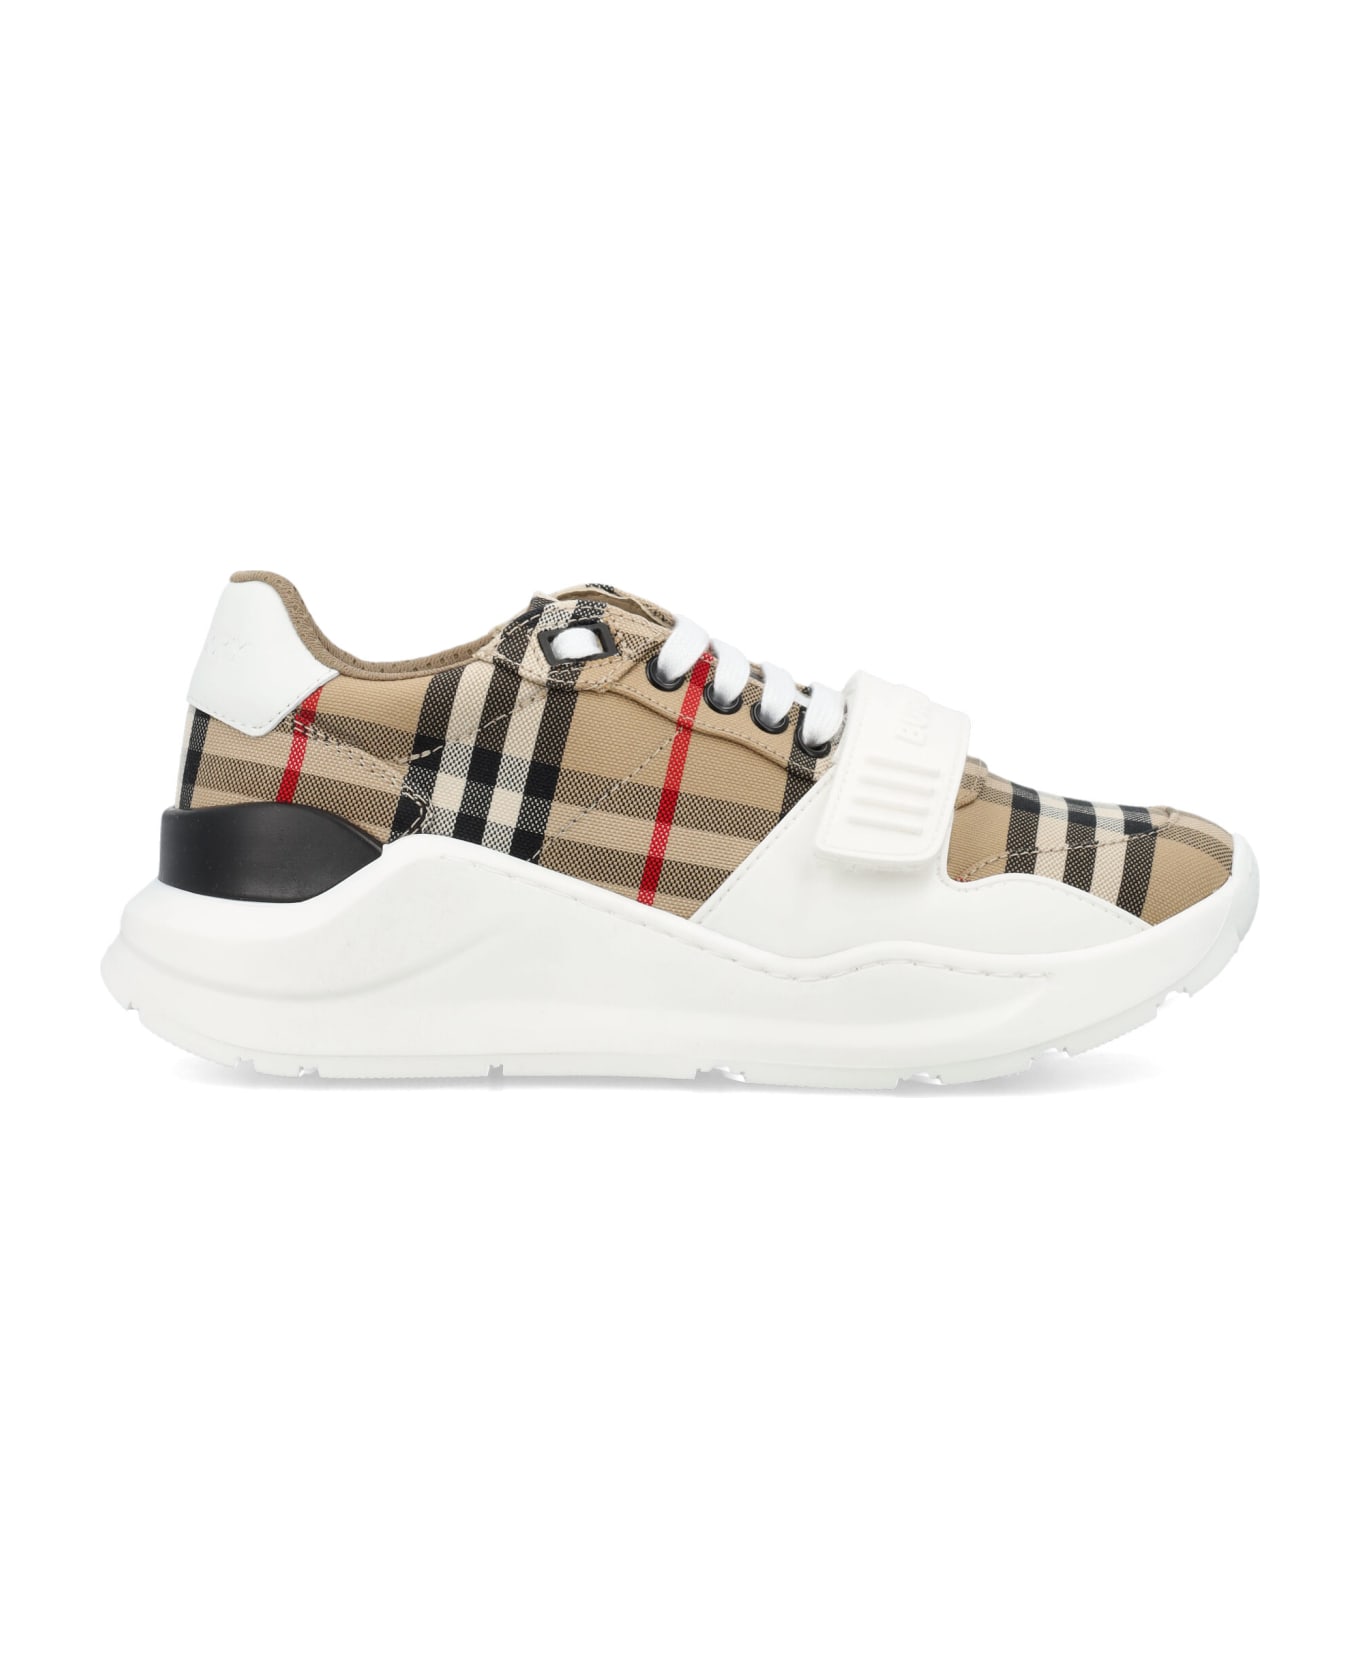 Burberry London Check Woman's Sneakers - ARCHIVE BEIGE IP CHK